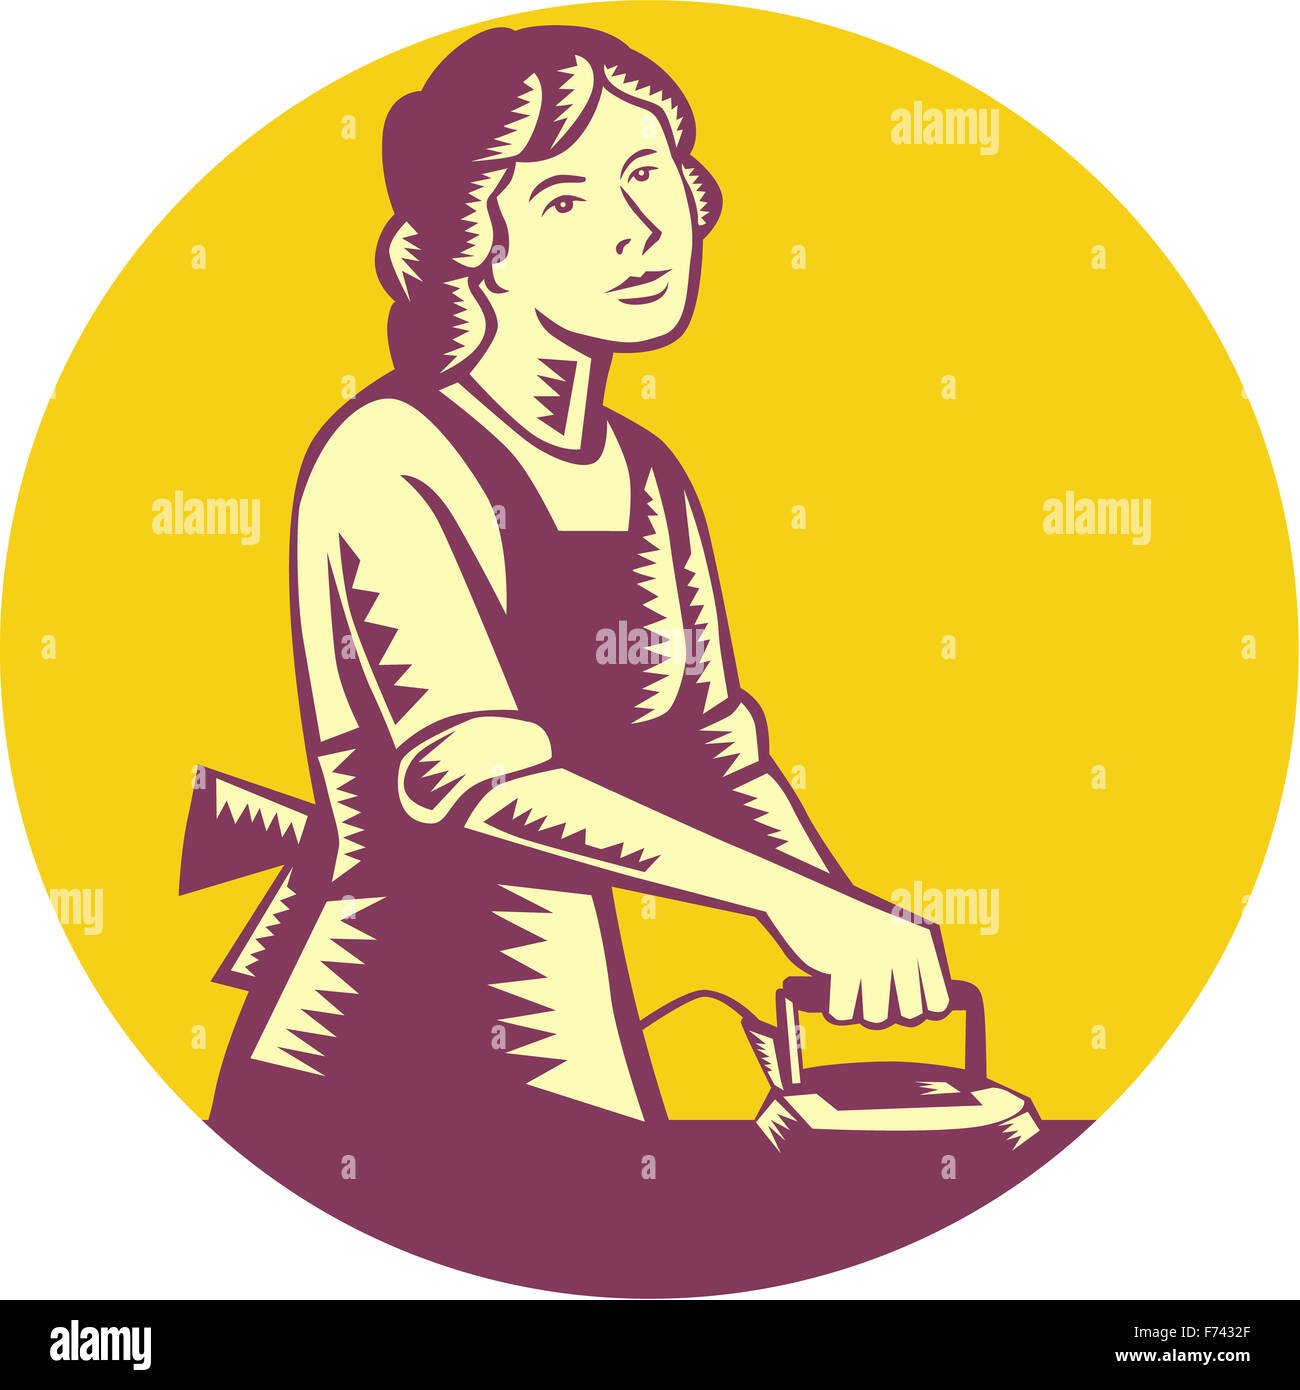 Illustration of a housewife ironing viewed from front set inside circle done in retro woodcut style. Stock Photo